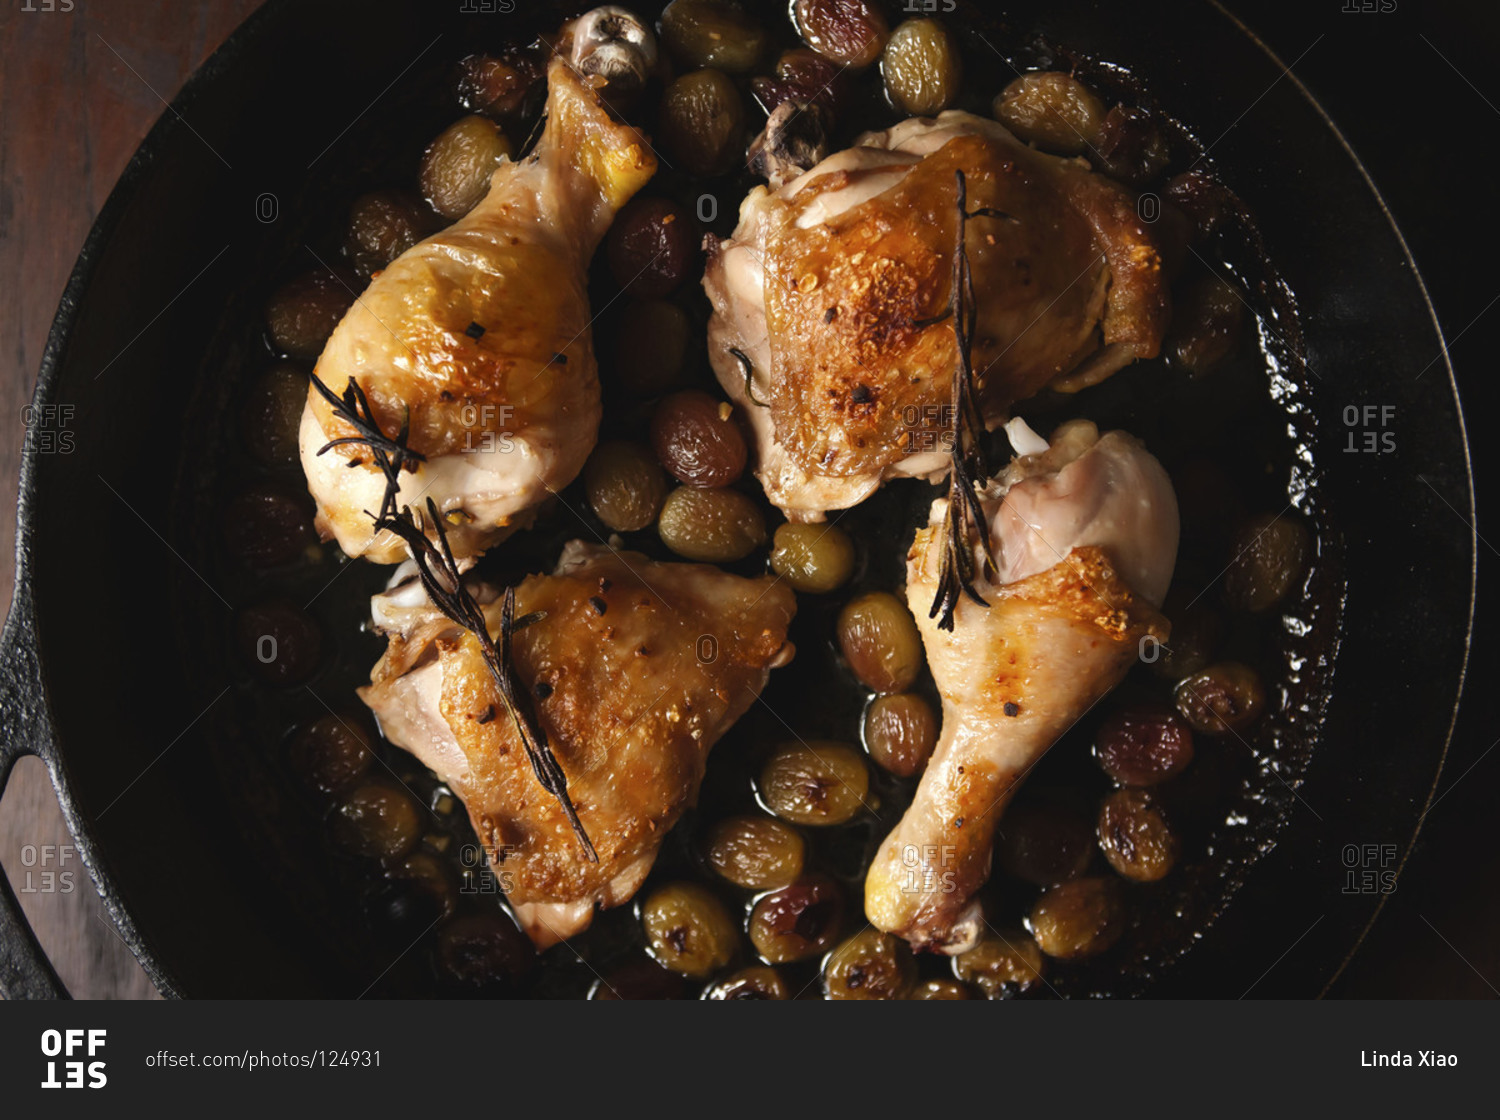 Roasted chicken thighs in a skillet